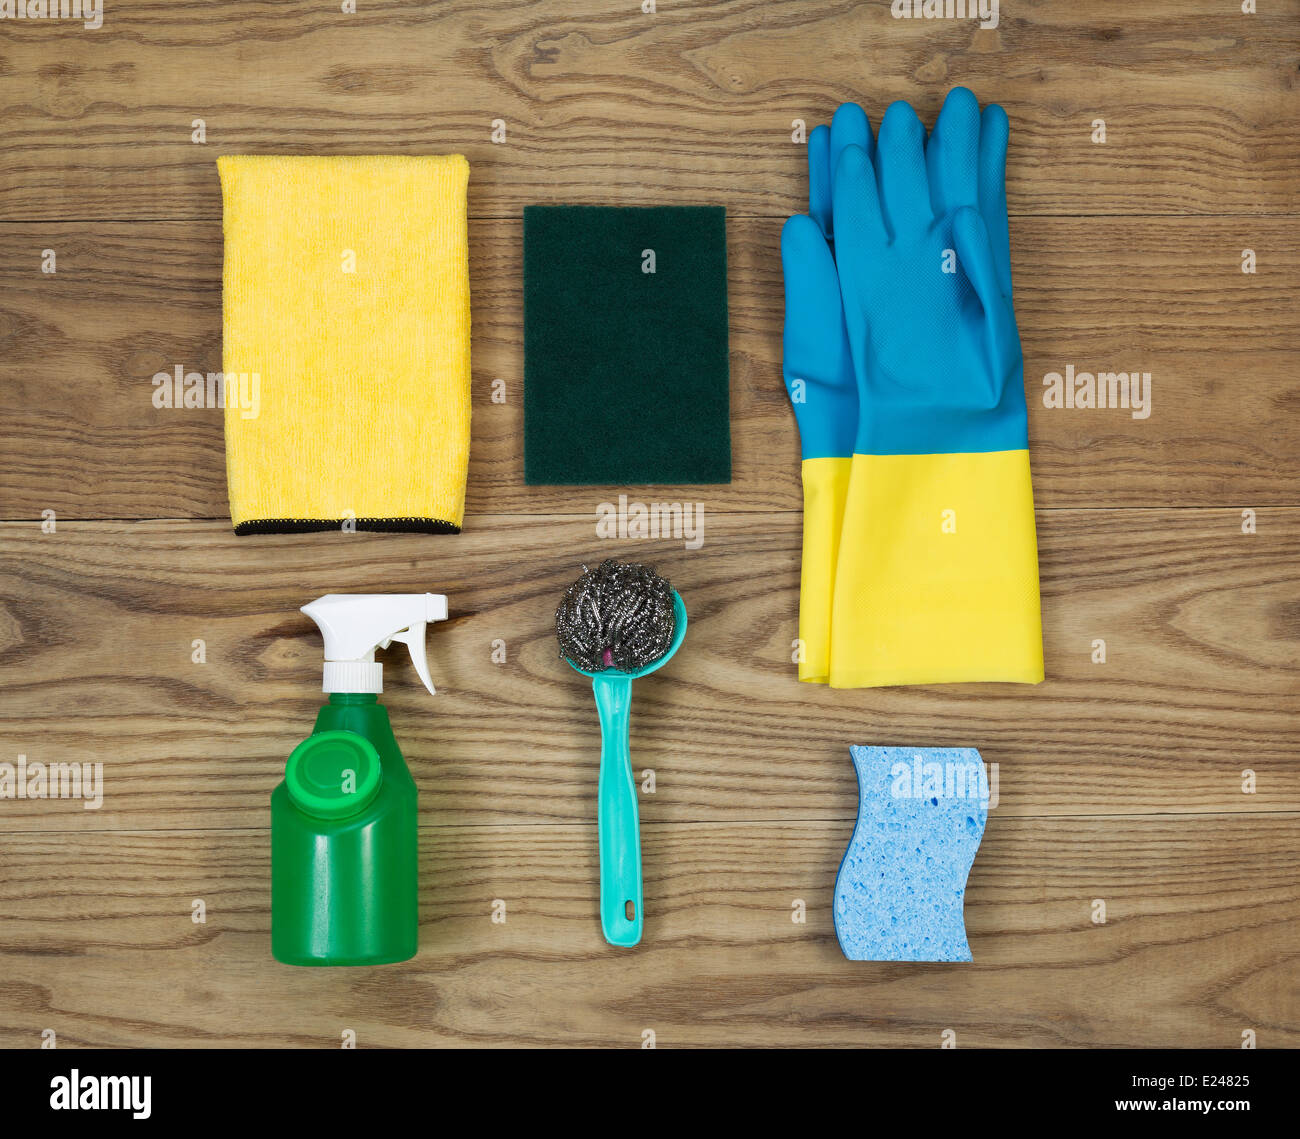 Overhead view of house cleaning materials placed on rustic wood. Stock Photo